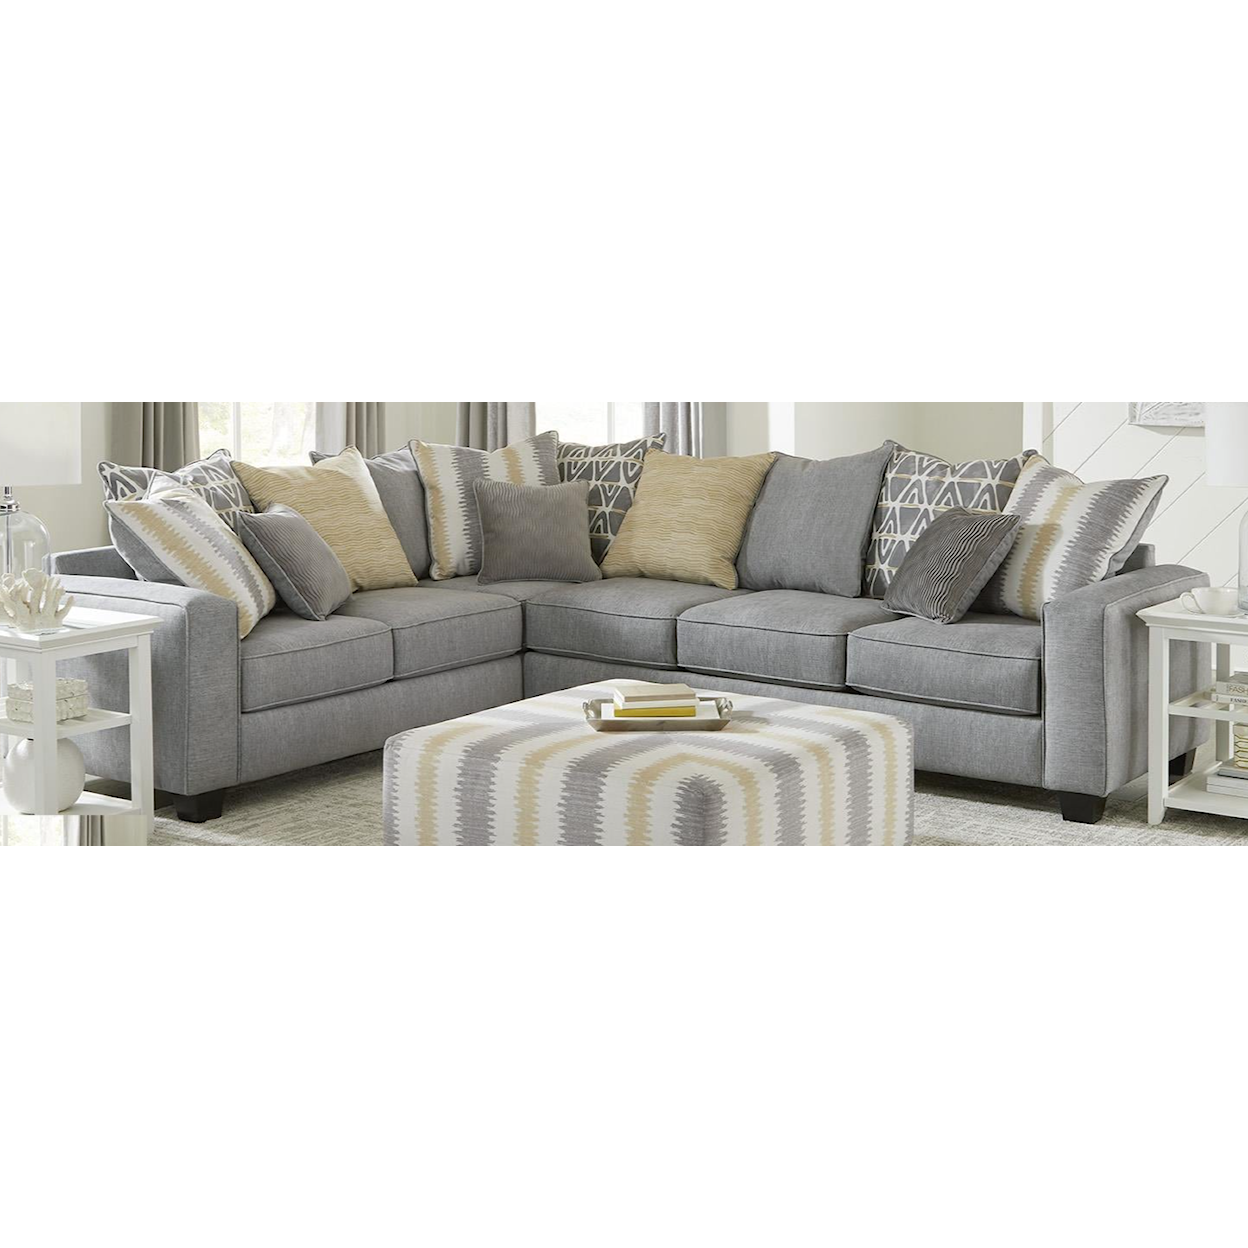 Albany 0465 2-Piece Sectional Sofa 